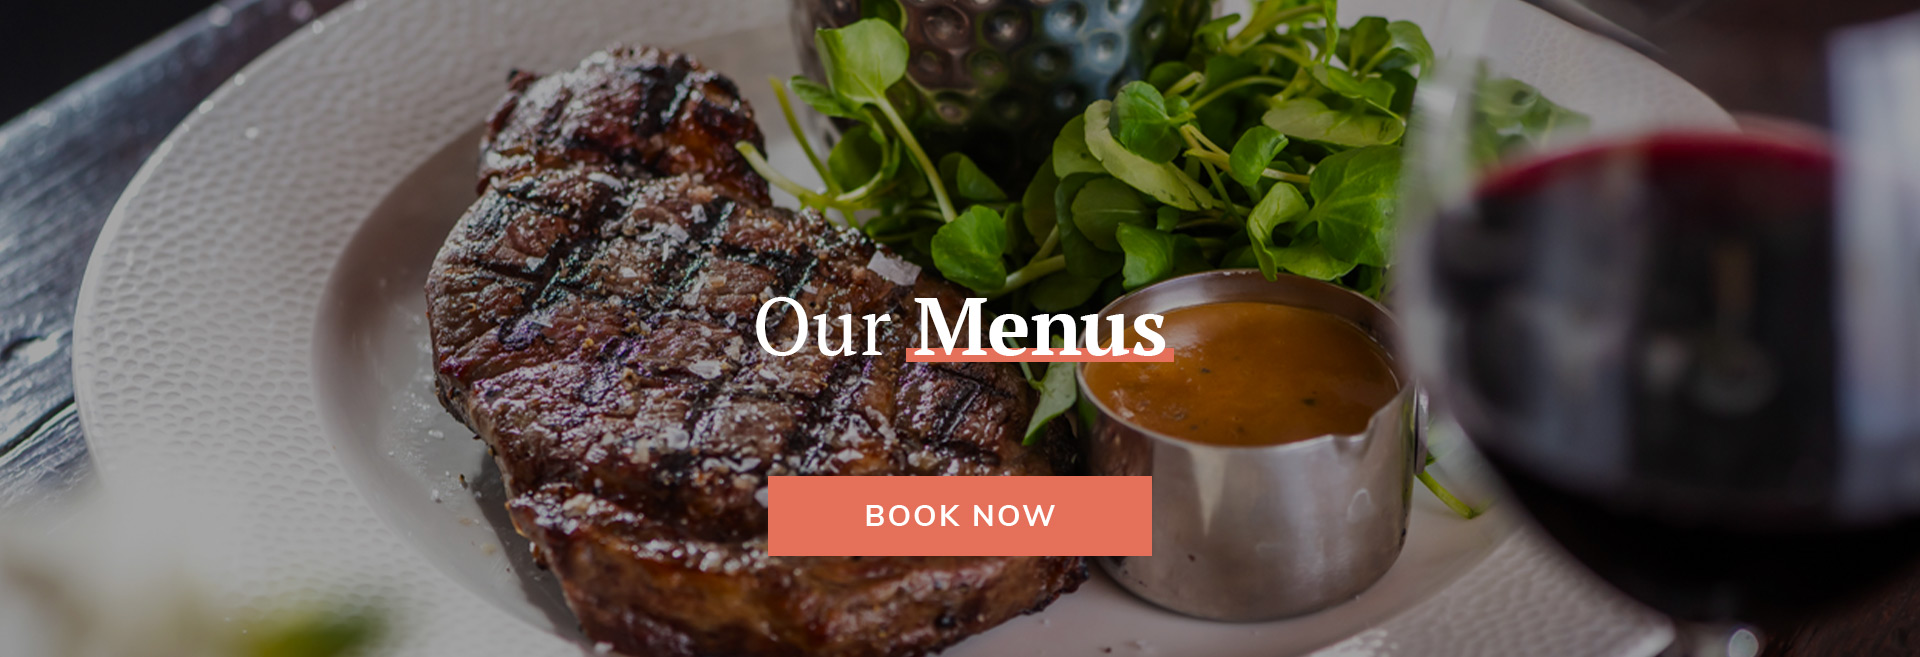 Book Now at The Ranelagh